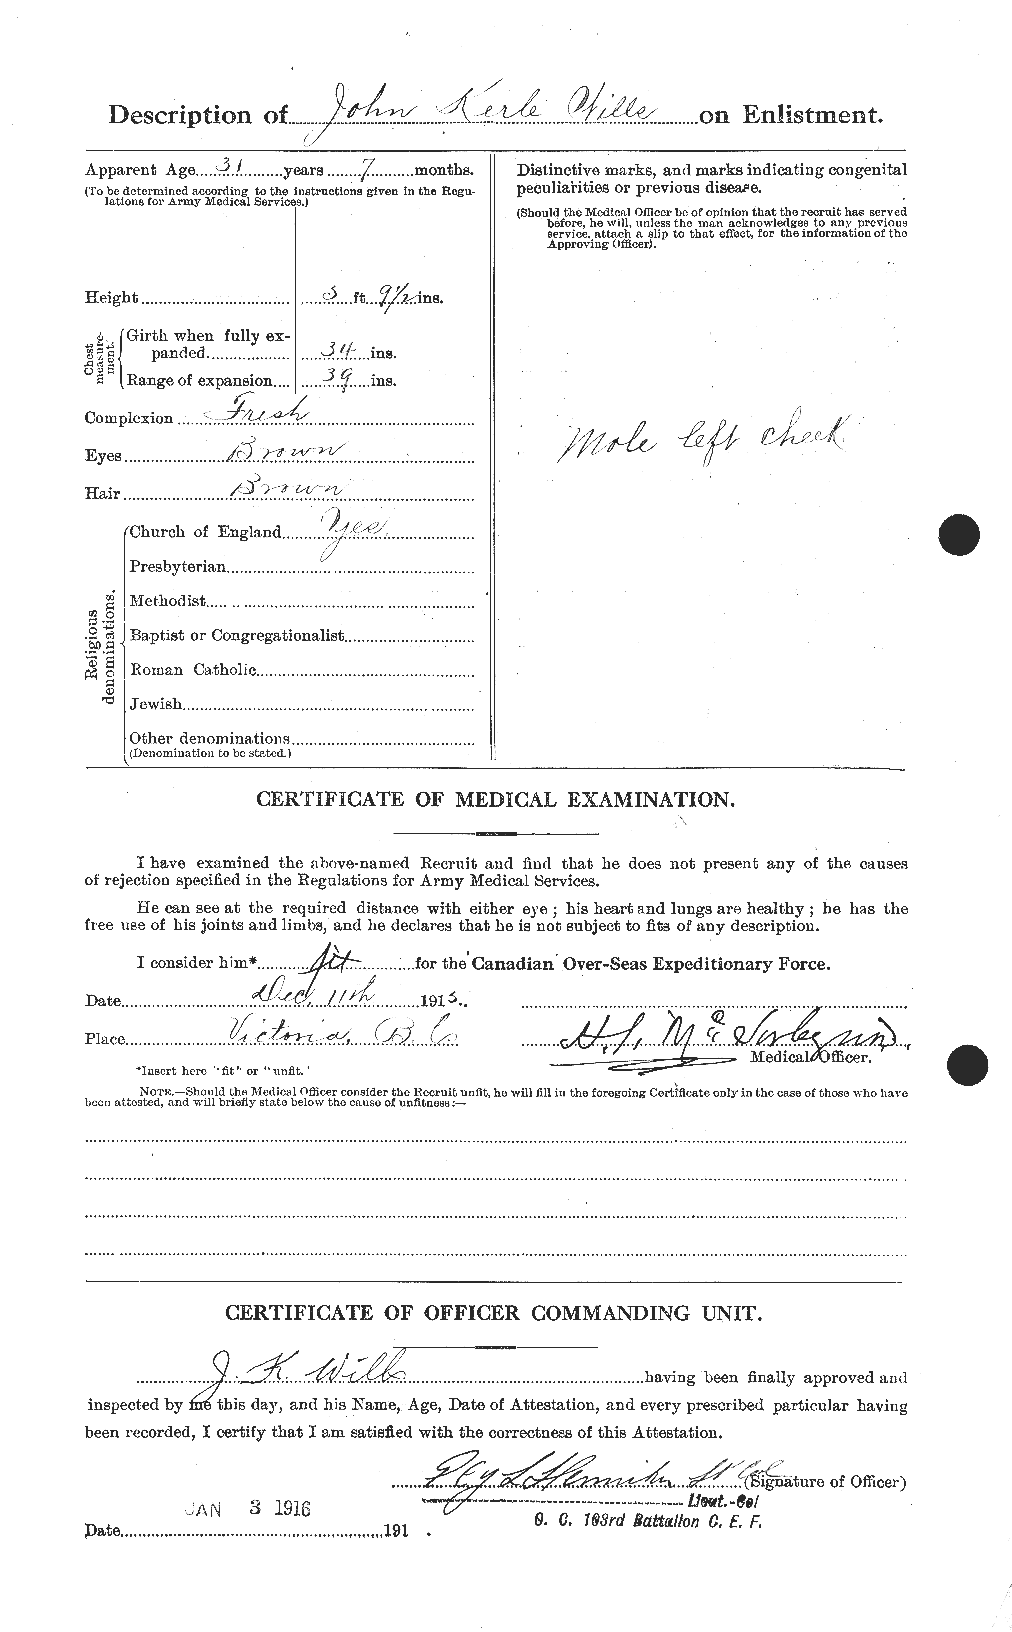 Personnel Records of the First World War - CEF 678418b